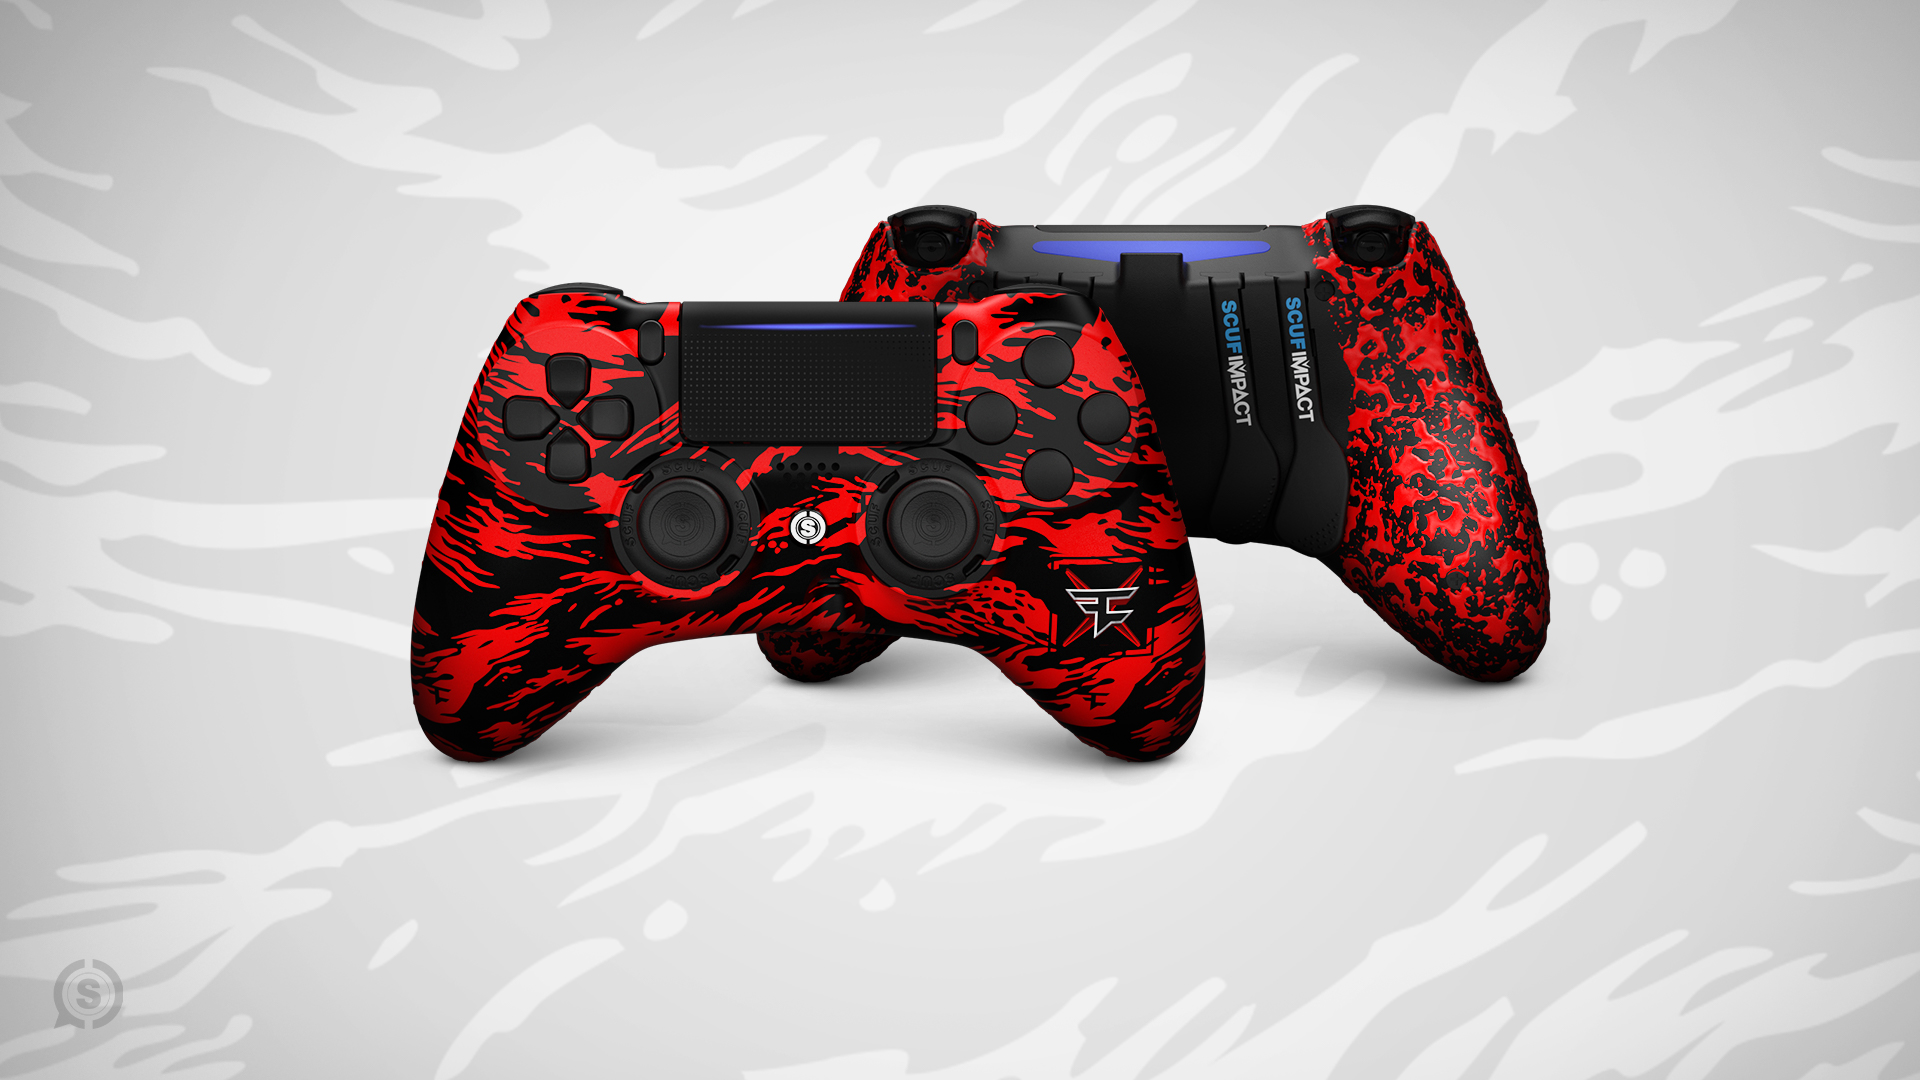 SCUF on Twitter: "We're excited to celebrate @FaZeClan's 10th anniversary  with a giveaway of an exclusive SCUF x FaZe Impact! 🎉 To enter: • RT &  Like this tweet • Follow @ScufGaming